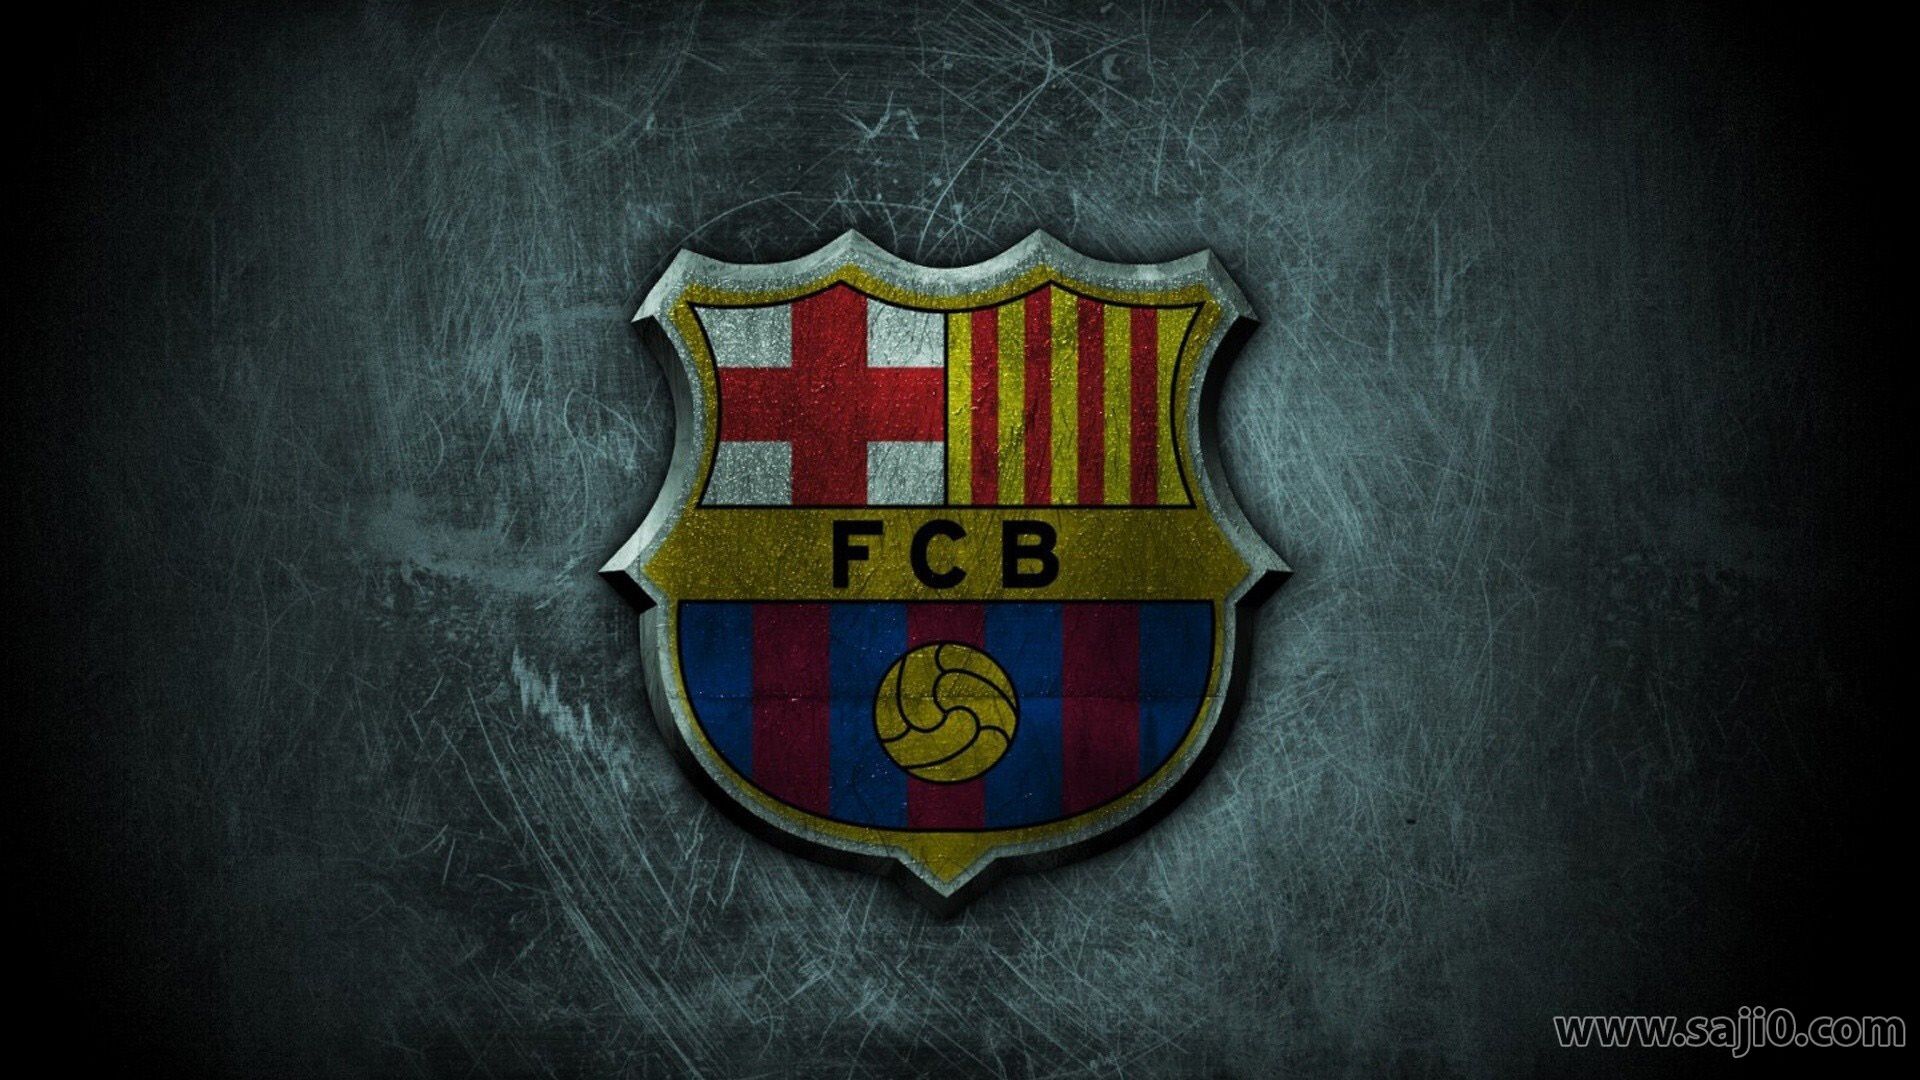 Barcelona picture and wallpaper in high quality 2021 HD